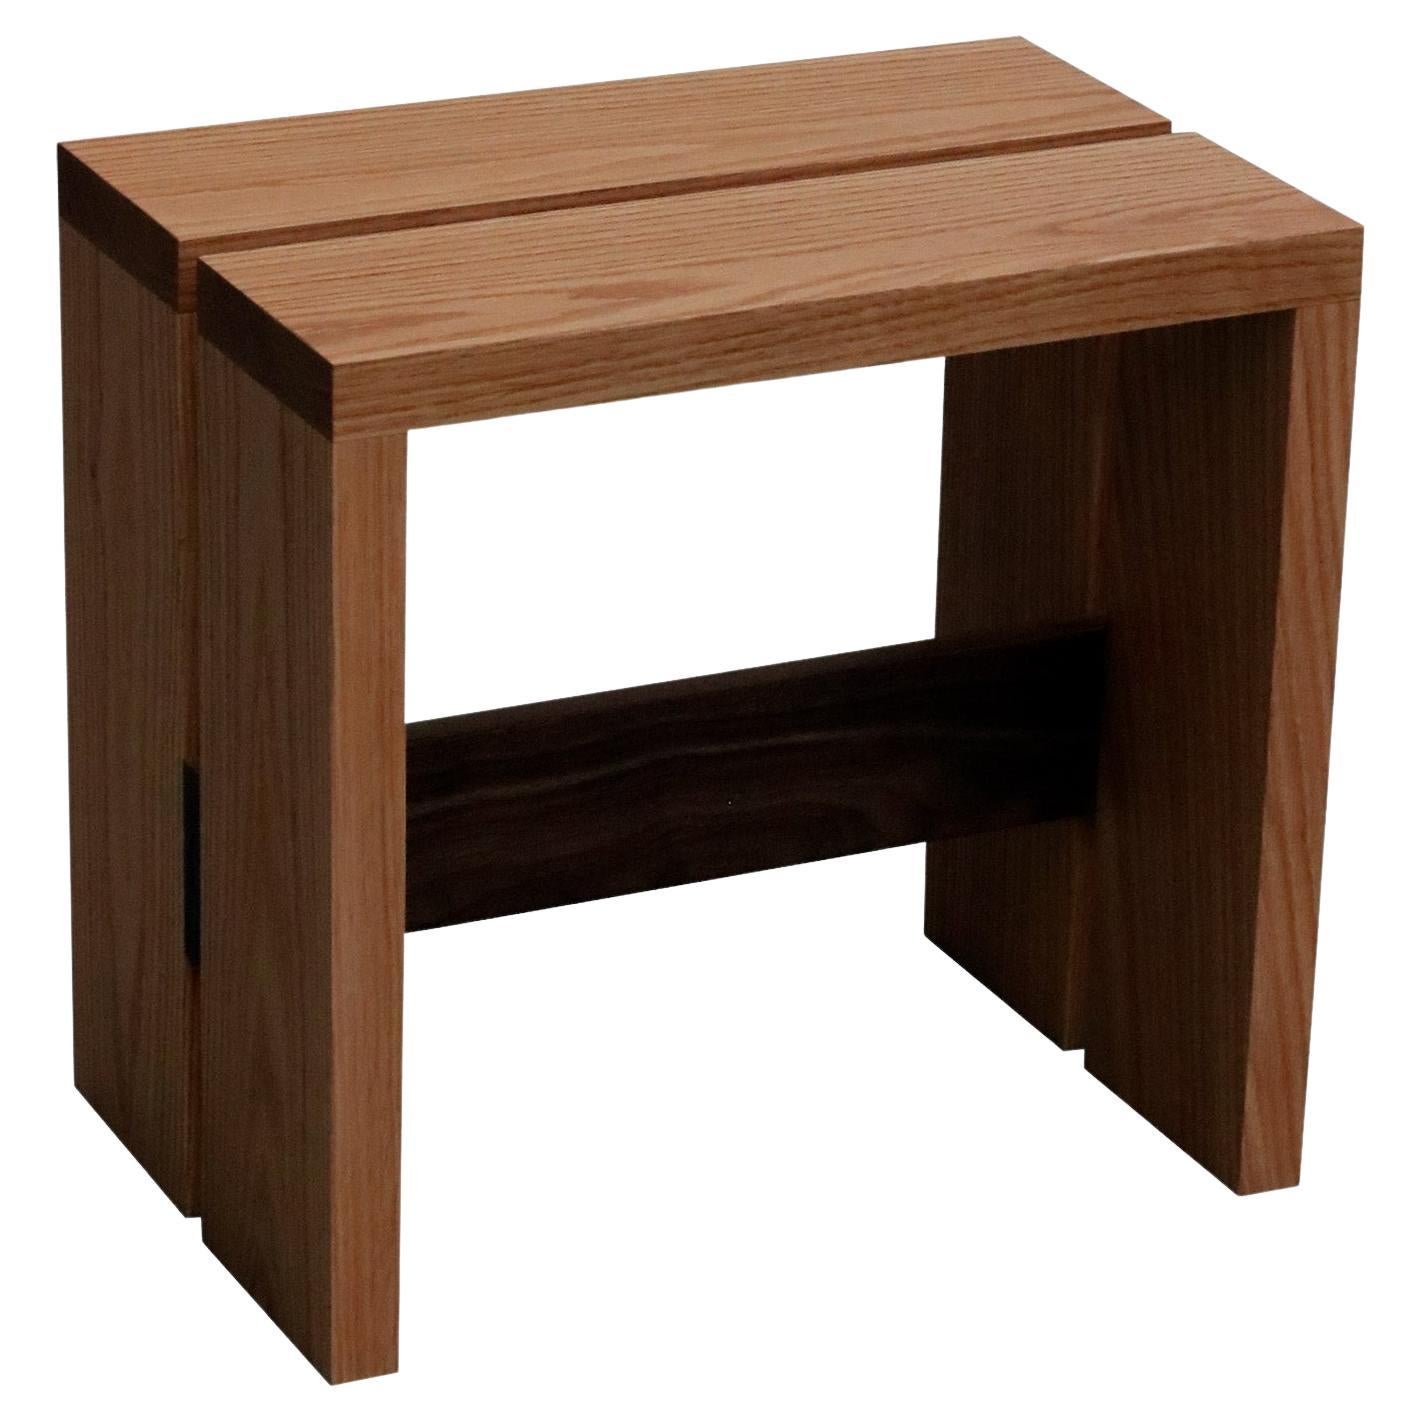 Tribute solid oak and walnut side table or stool For Sale